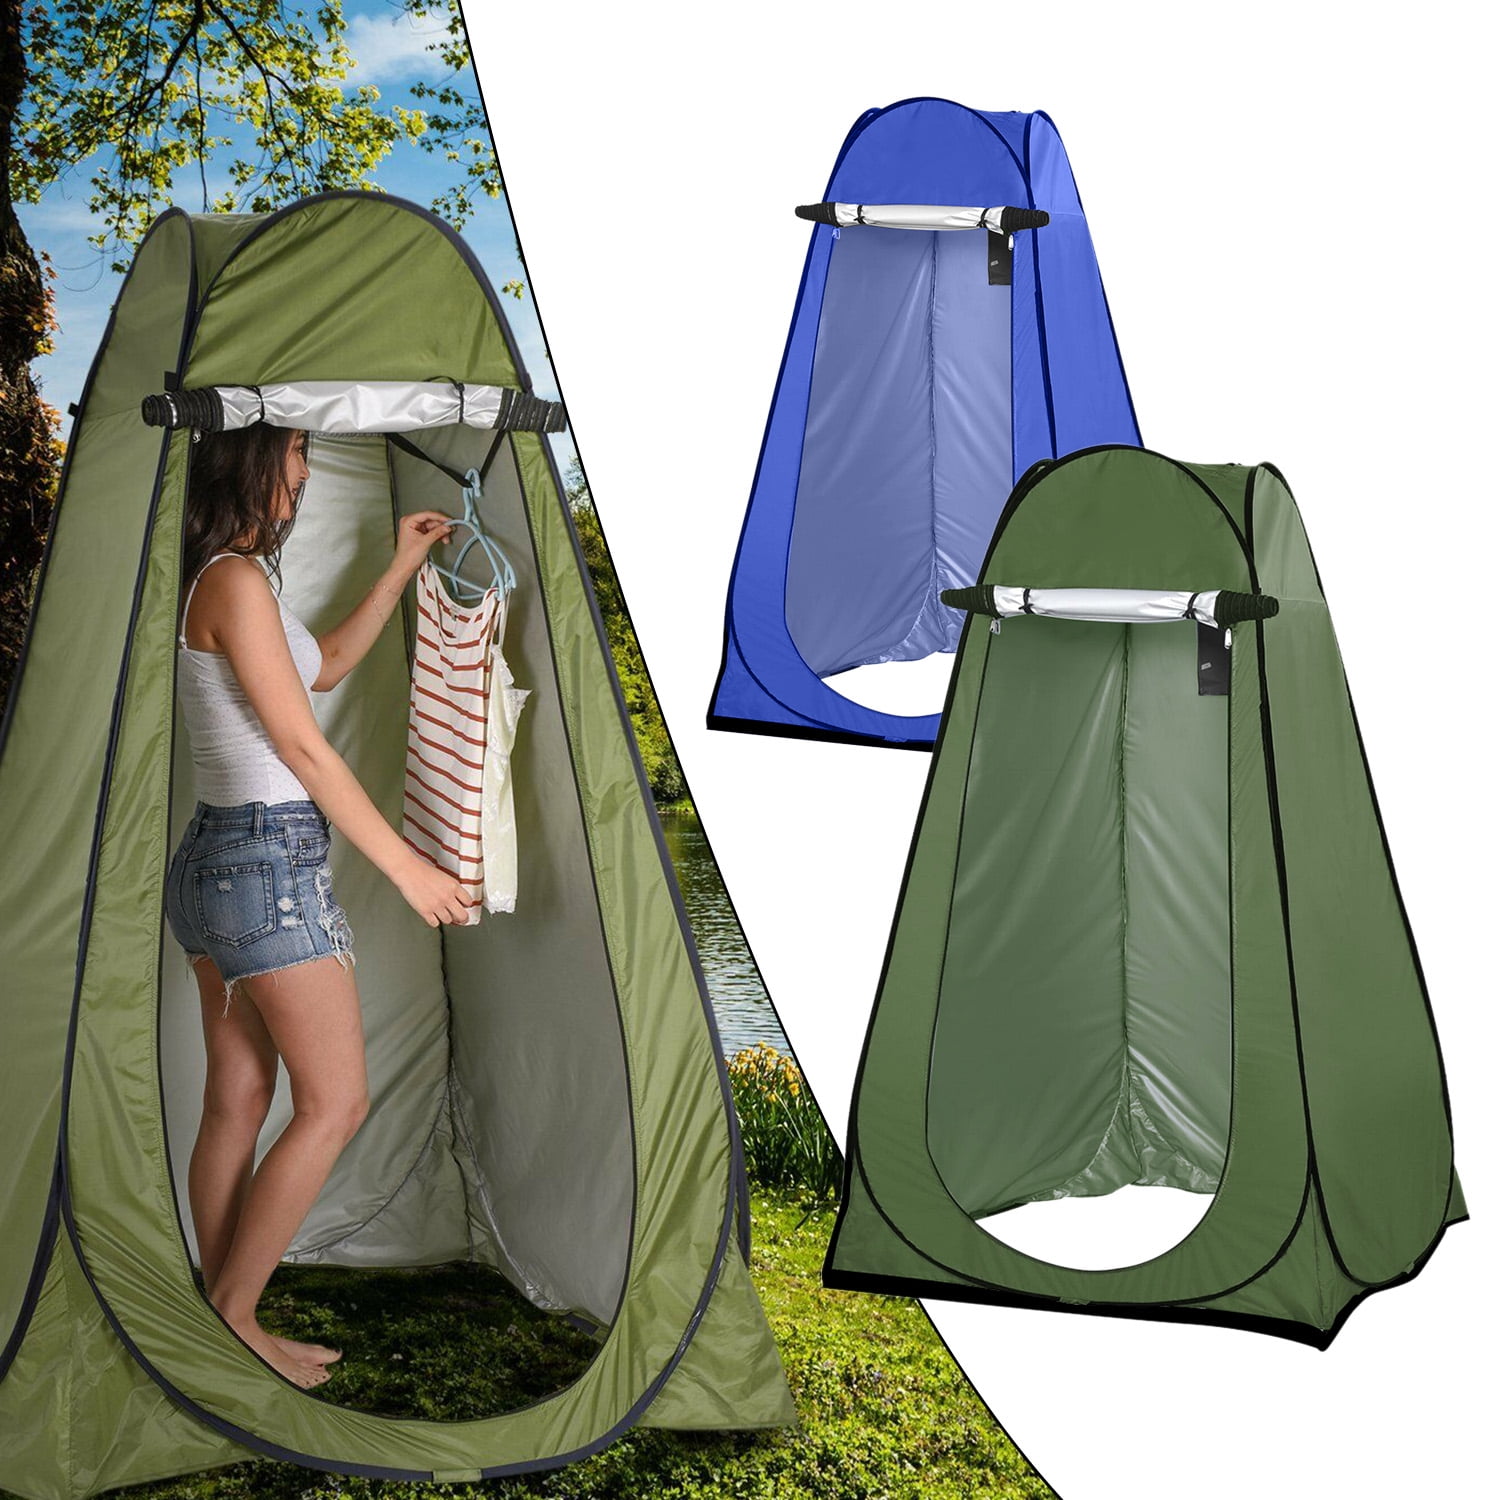 Waterproof N / P Vesani Portable Outdoor Foldable Bathroom Shelter Toilet Shower Tent Changing Dressing Room for Camping Swimming Easy Setup Lightweight Easy Storing 